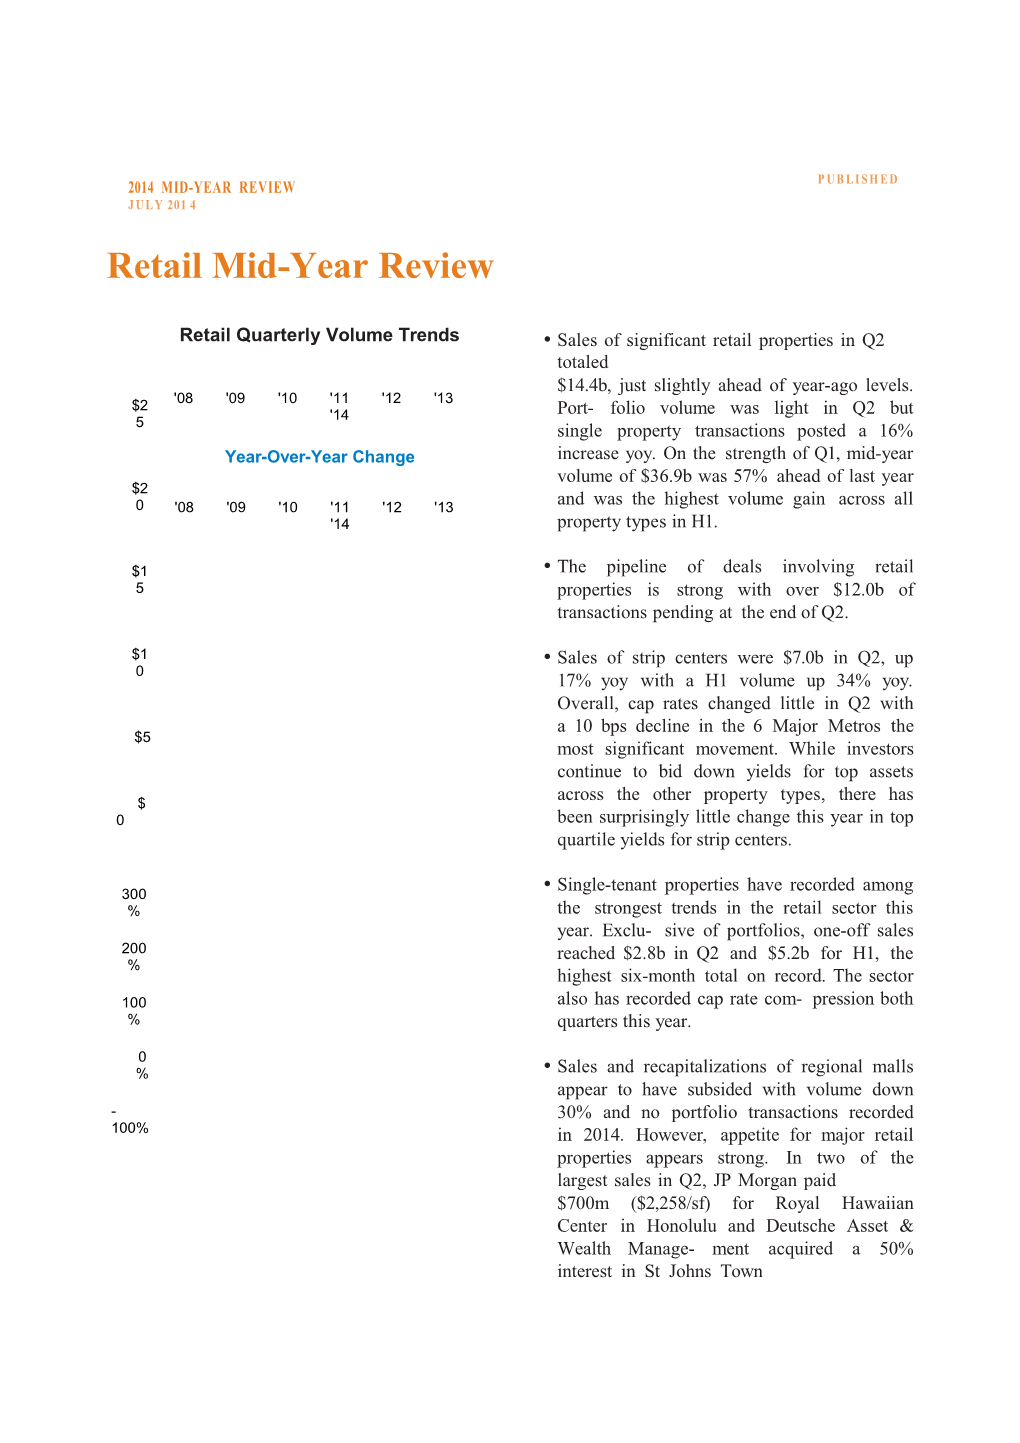 Retail Mid-Year Review